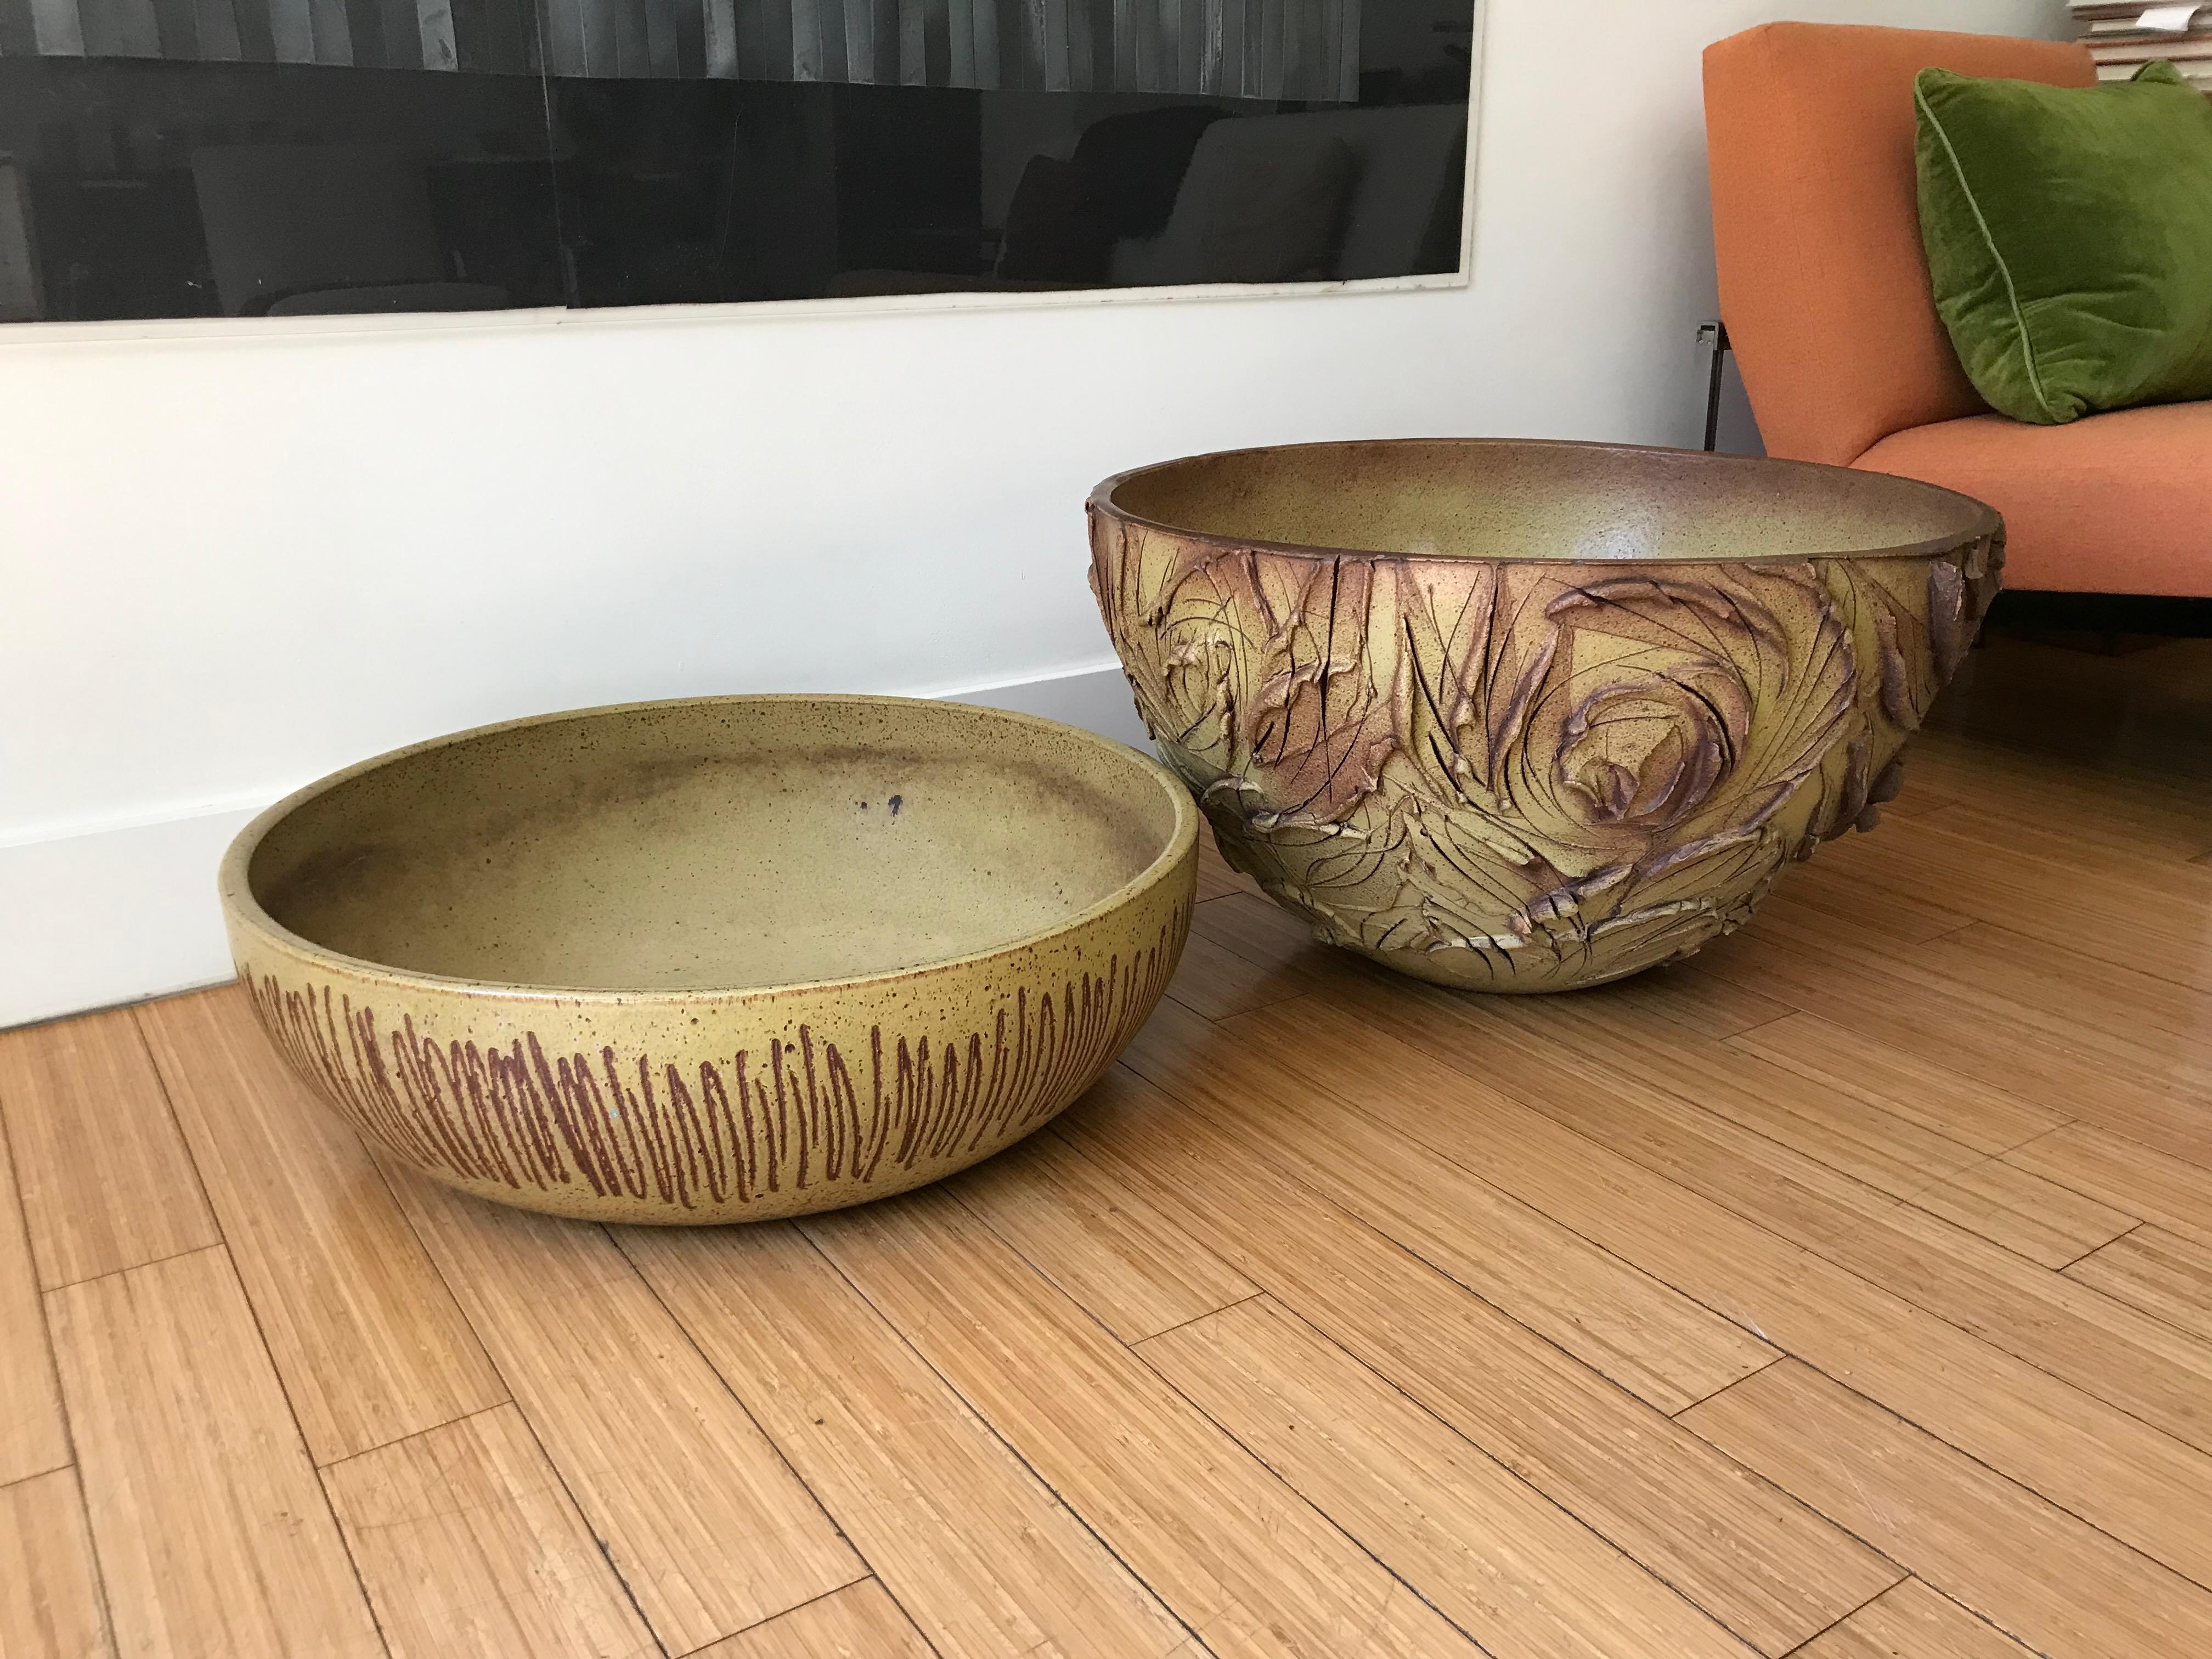 Great California design.
From the estate / collections of the late Peter Loughrey, the founder of Los Angeles Modern Auctions (LAMA). 
Made with Cressey's own reduction fired stoneware 